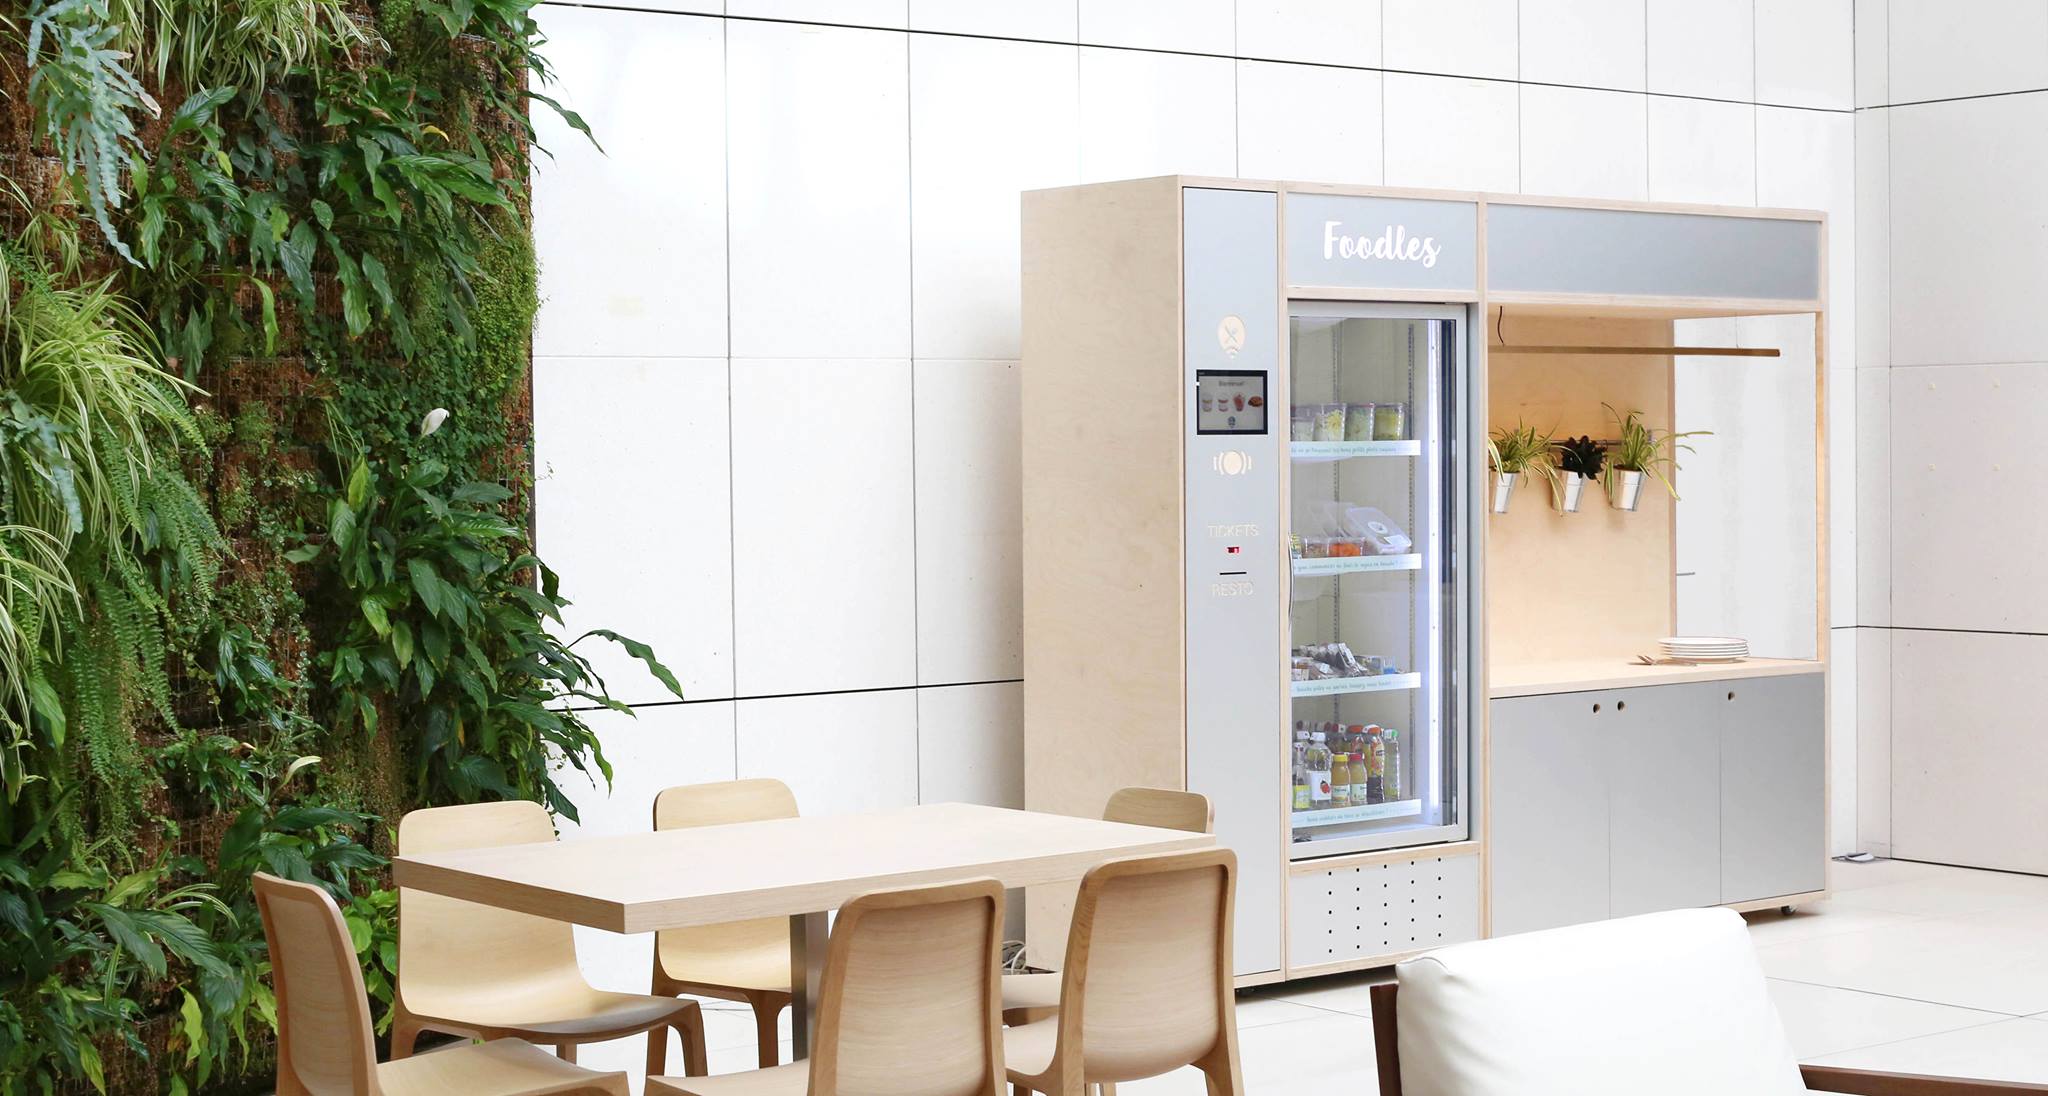 French Startup Foodles to Send Meals to Smart Fridge in Offices